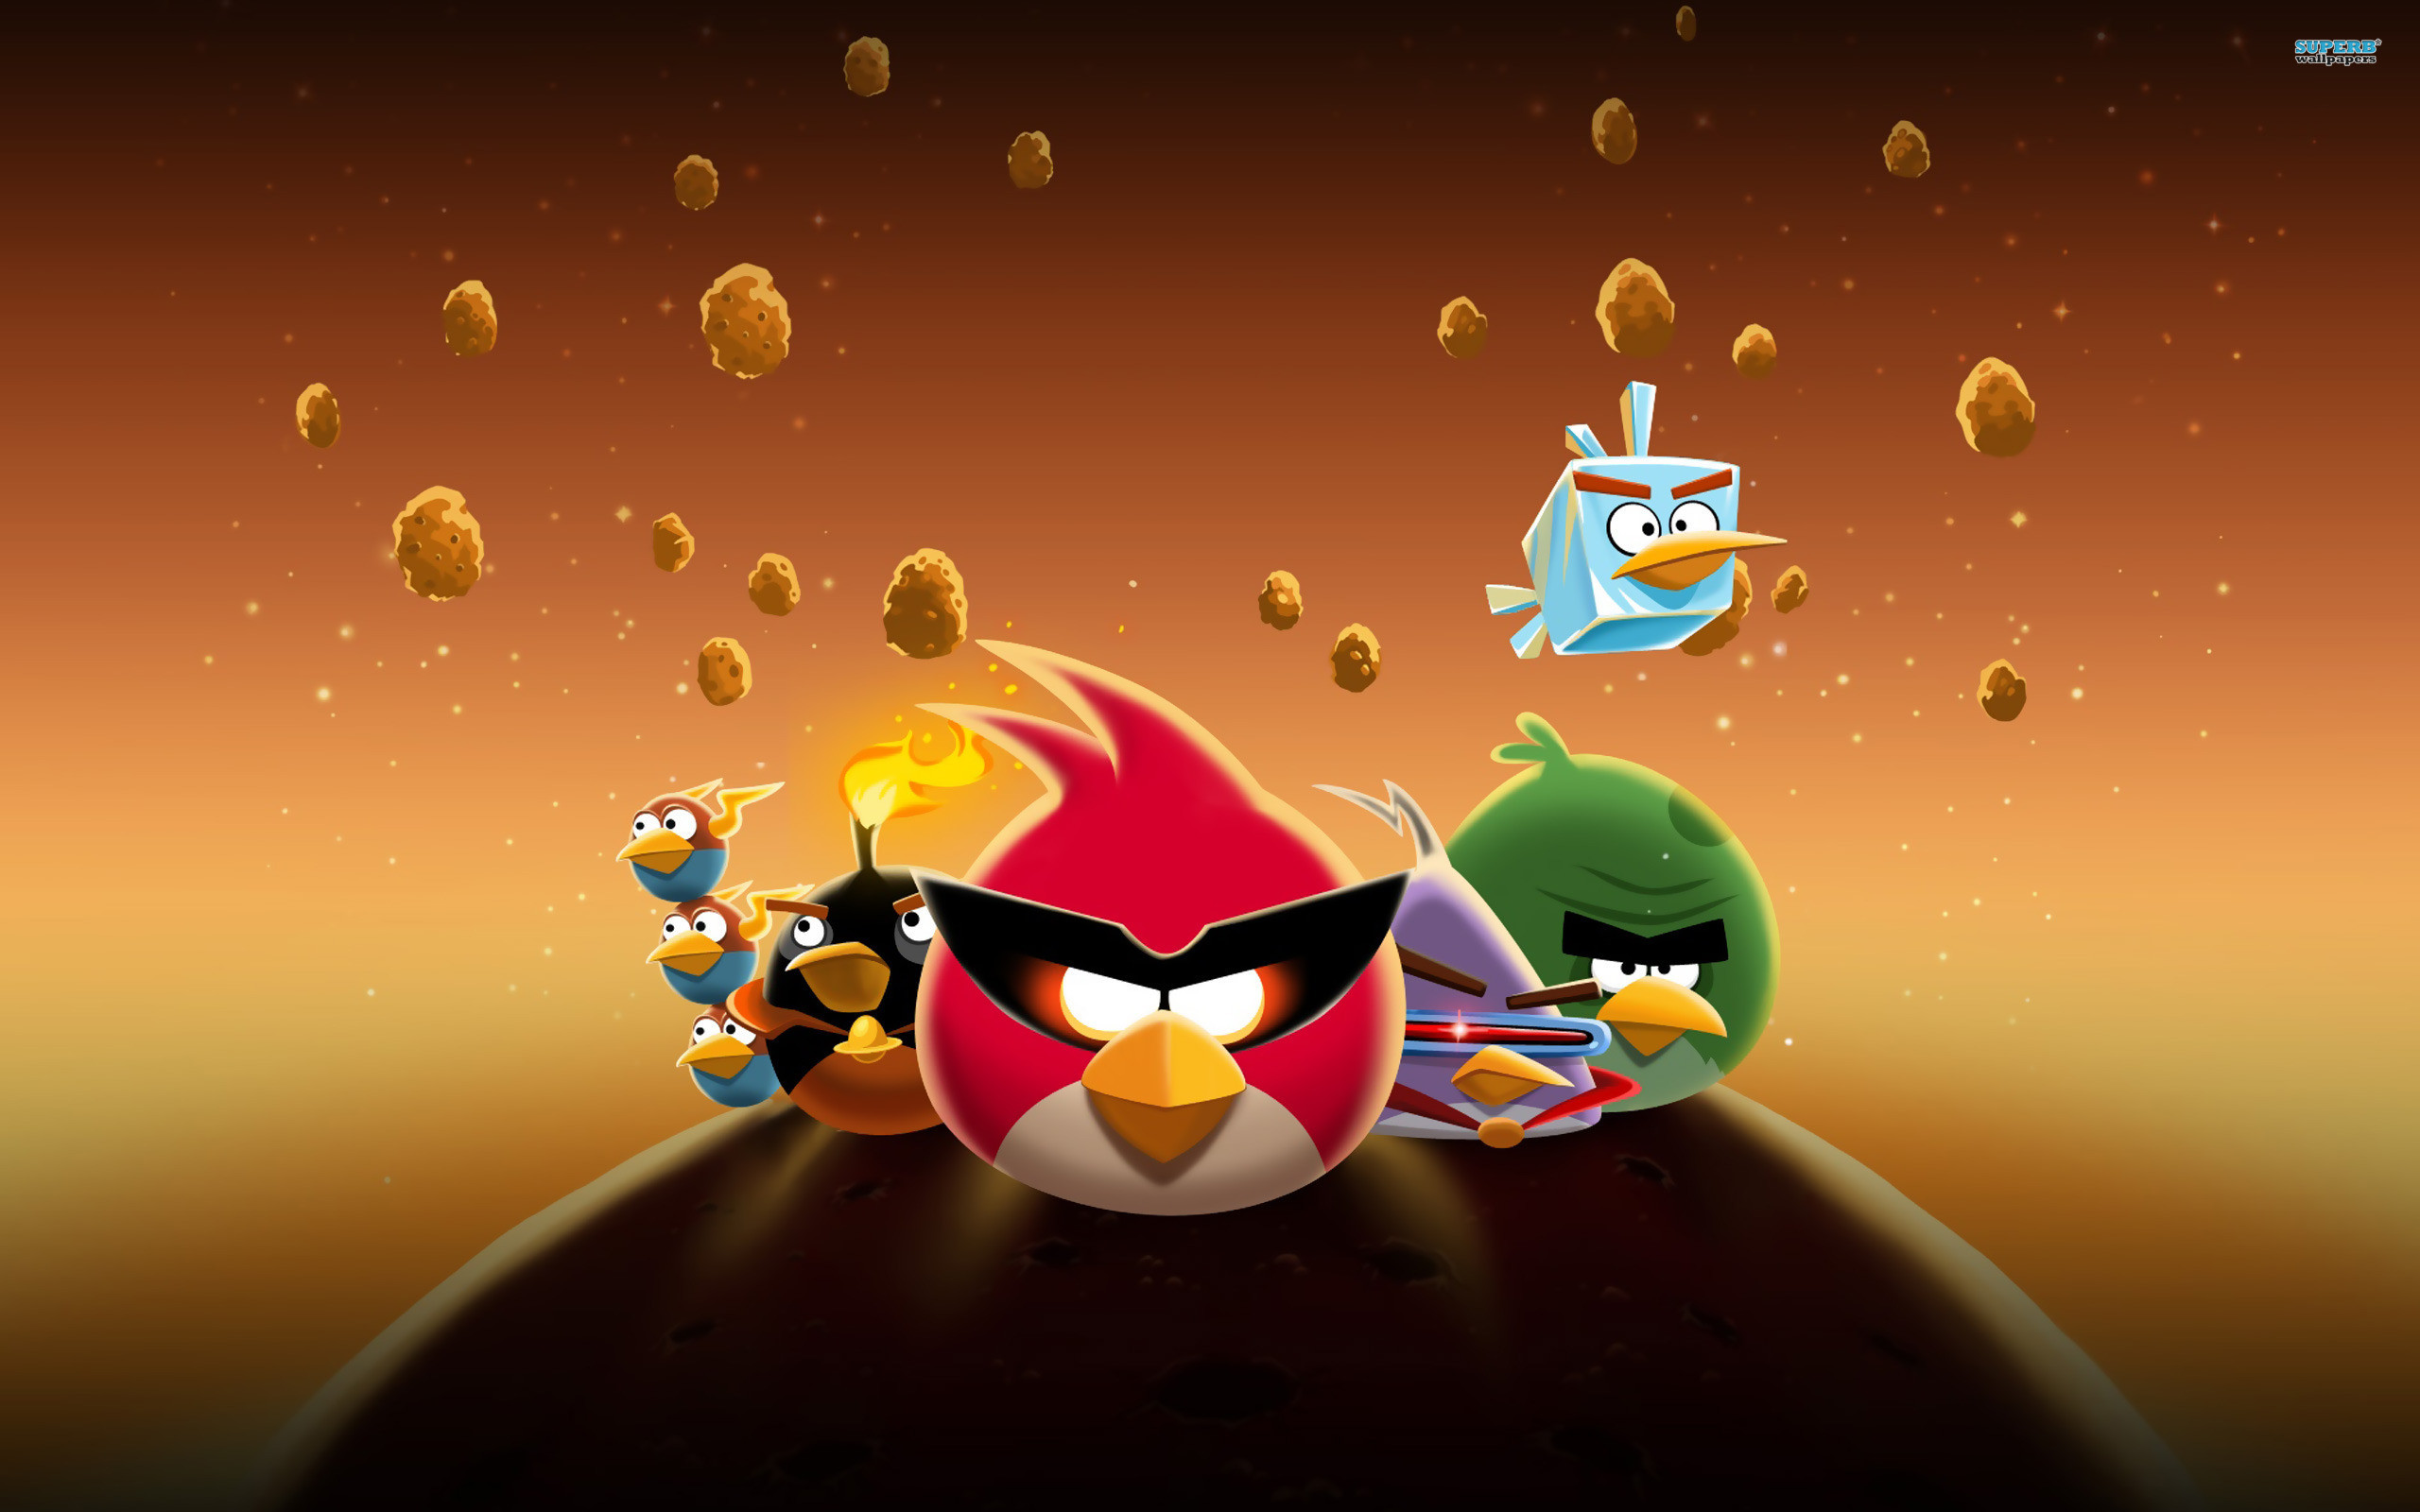 Angry Birds Space Image Wallpaper For Fb Cover - Angry Birds Space - HD Wallpaper 